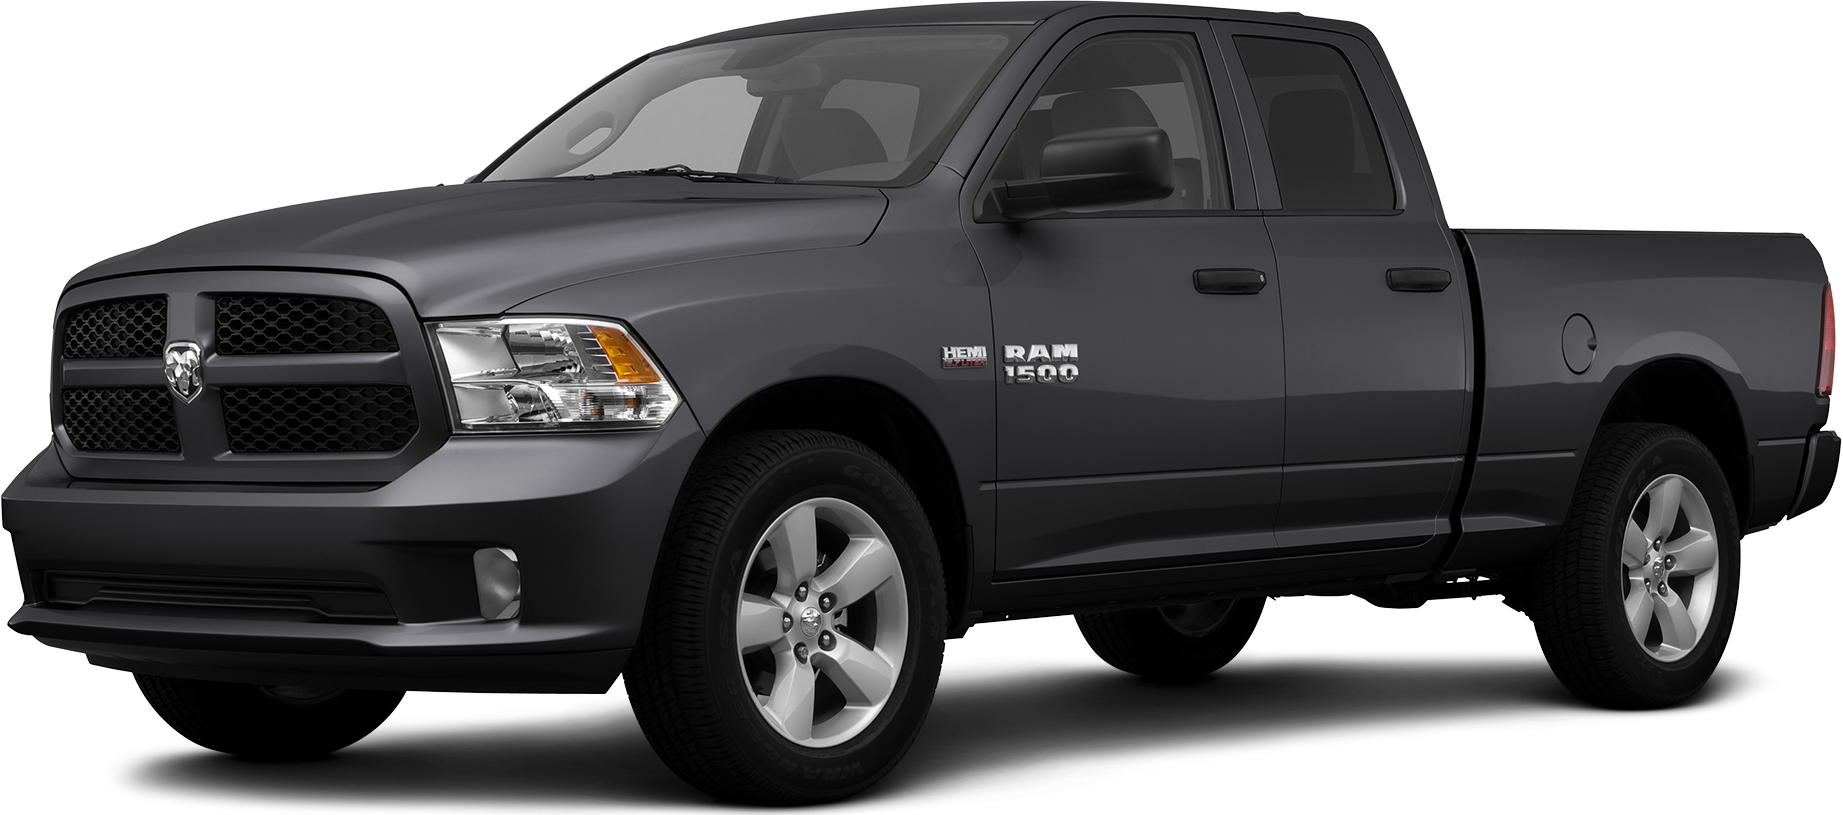 2013 Ram 1500 Quad Cab Price Value Ratings And Reviews Kelley Blue Book